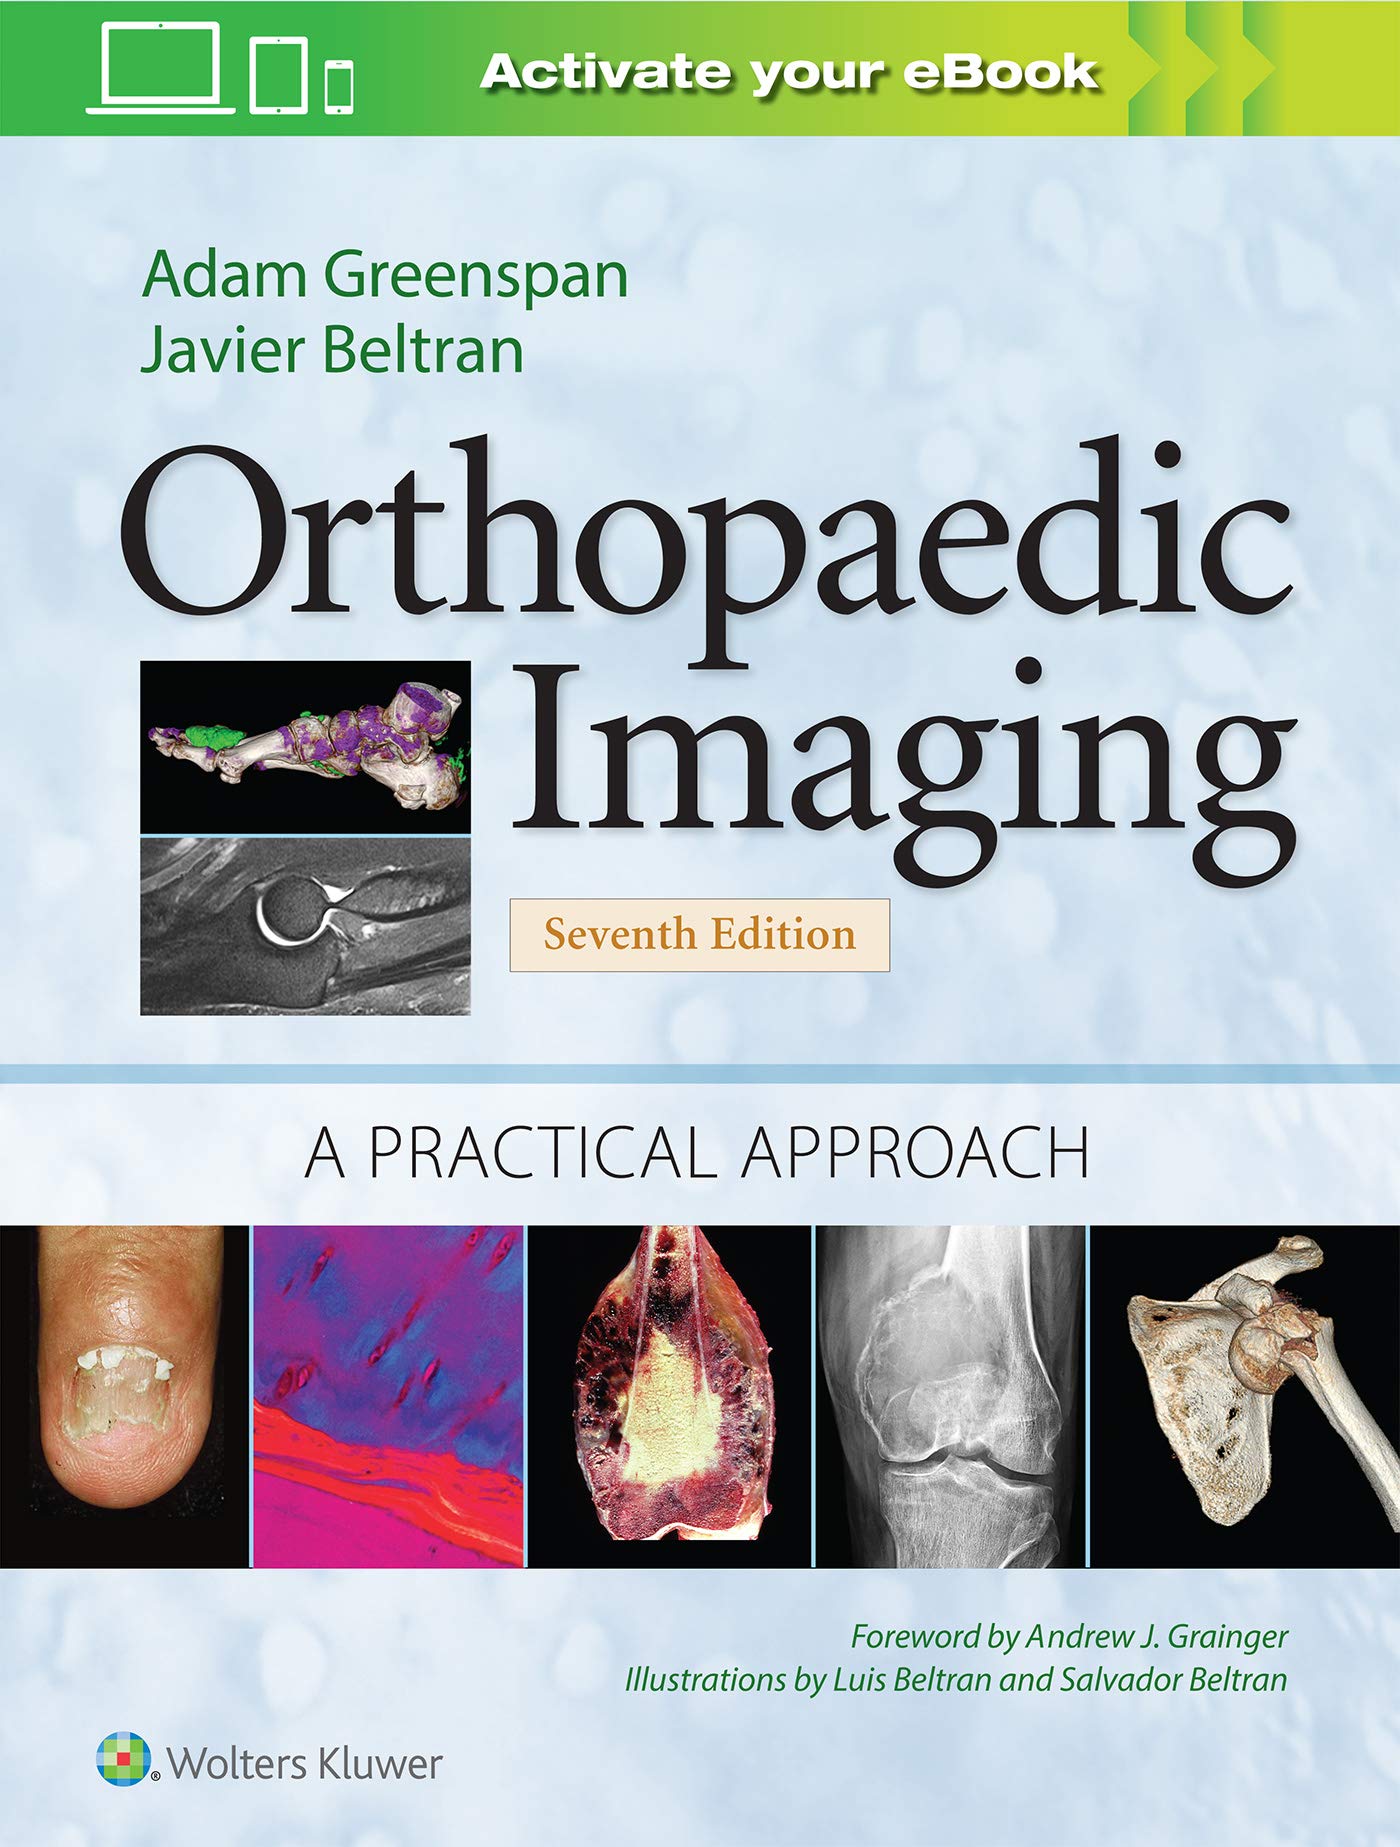 Orthopaedic Imaging: A Practical Approach Seventh Edition